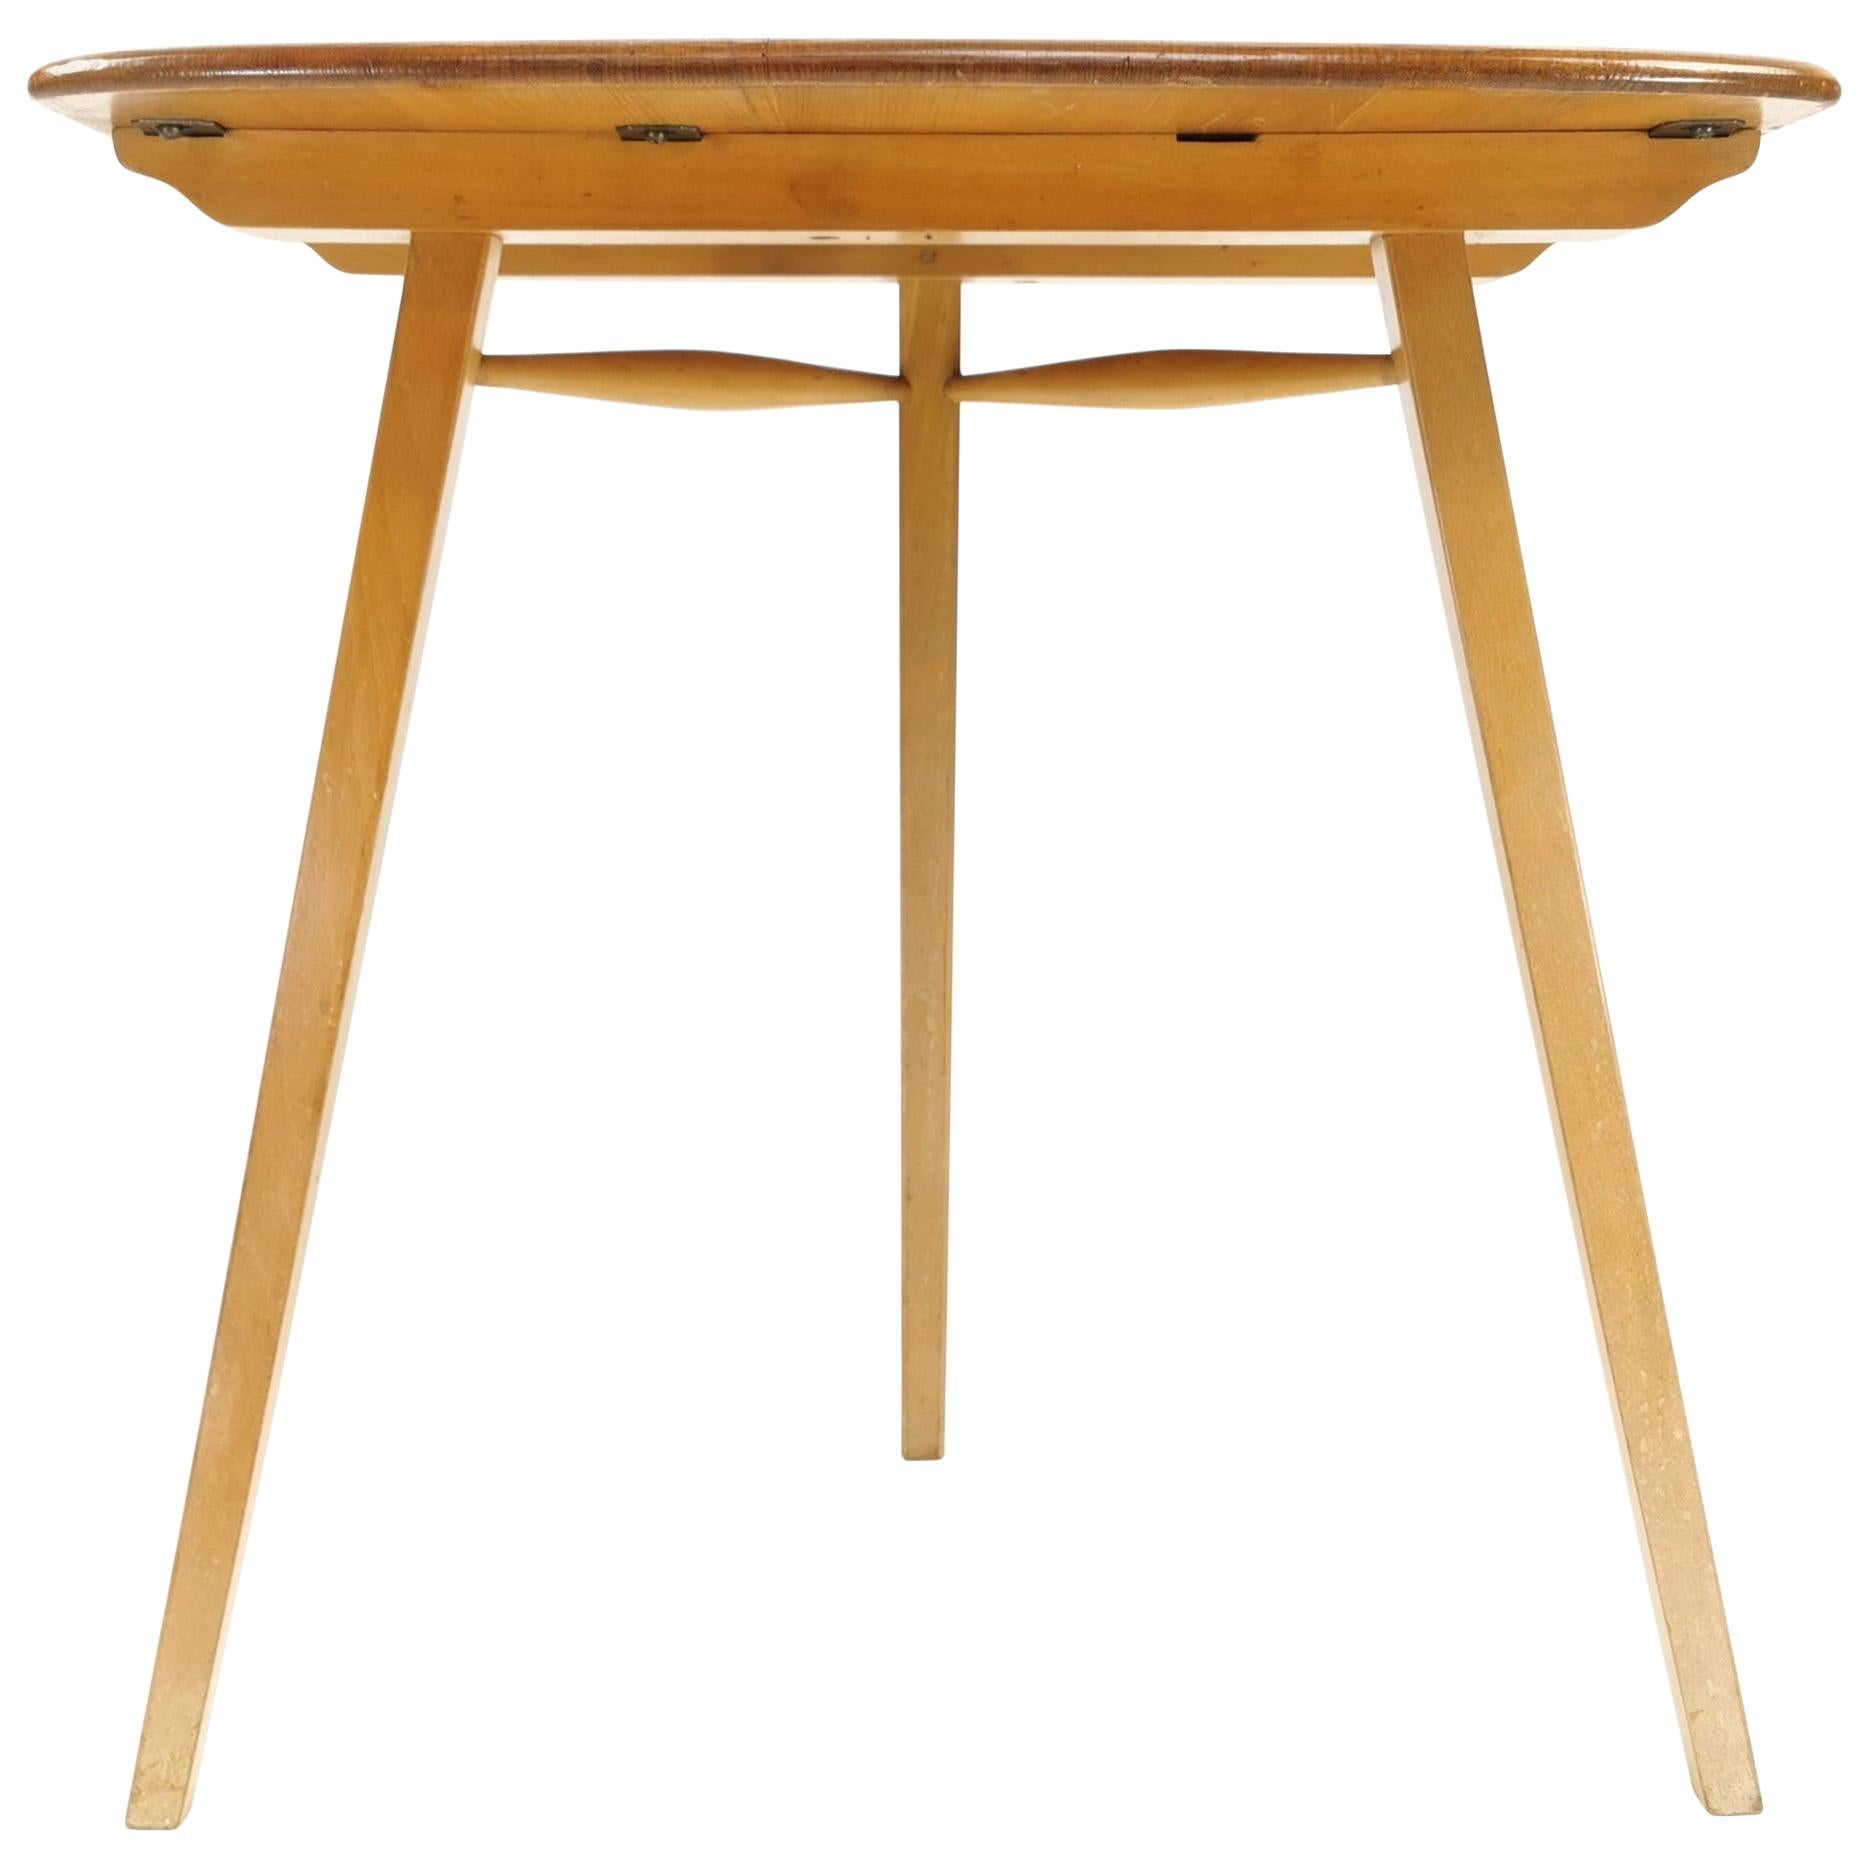 Ercol Plank Top Writing Desk Compact Occasional Table Midcentury